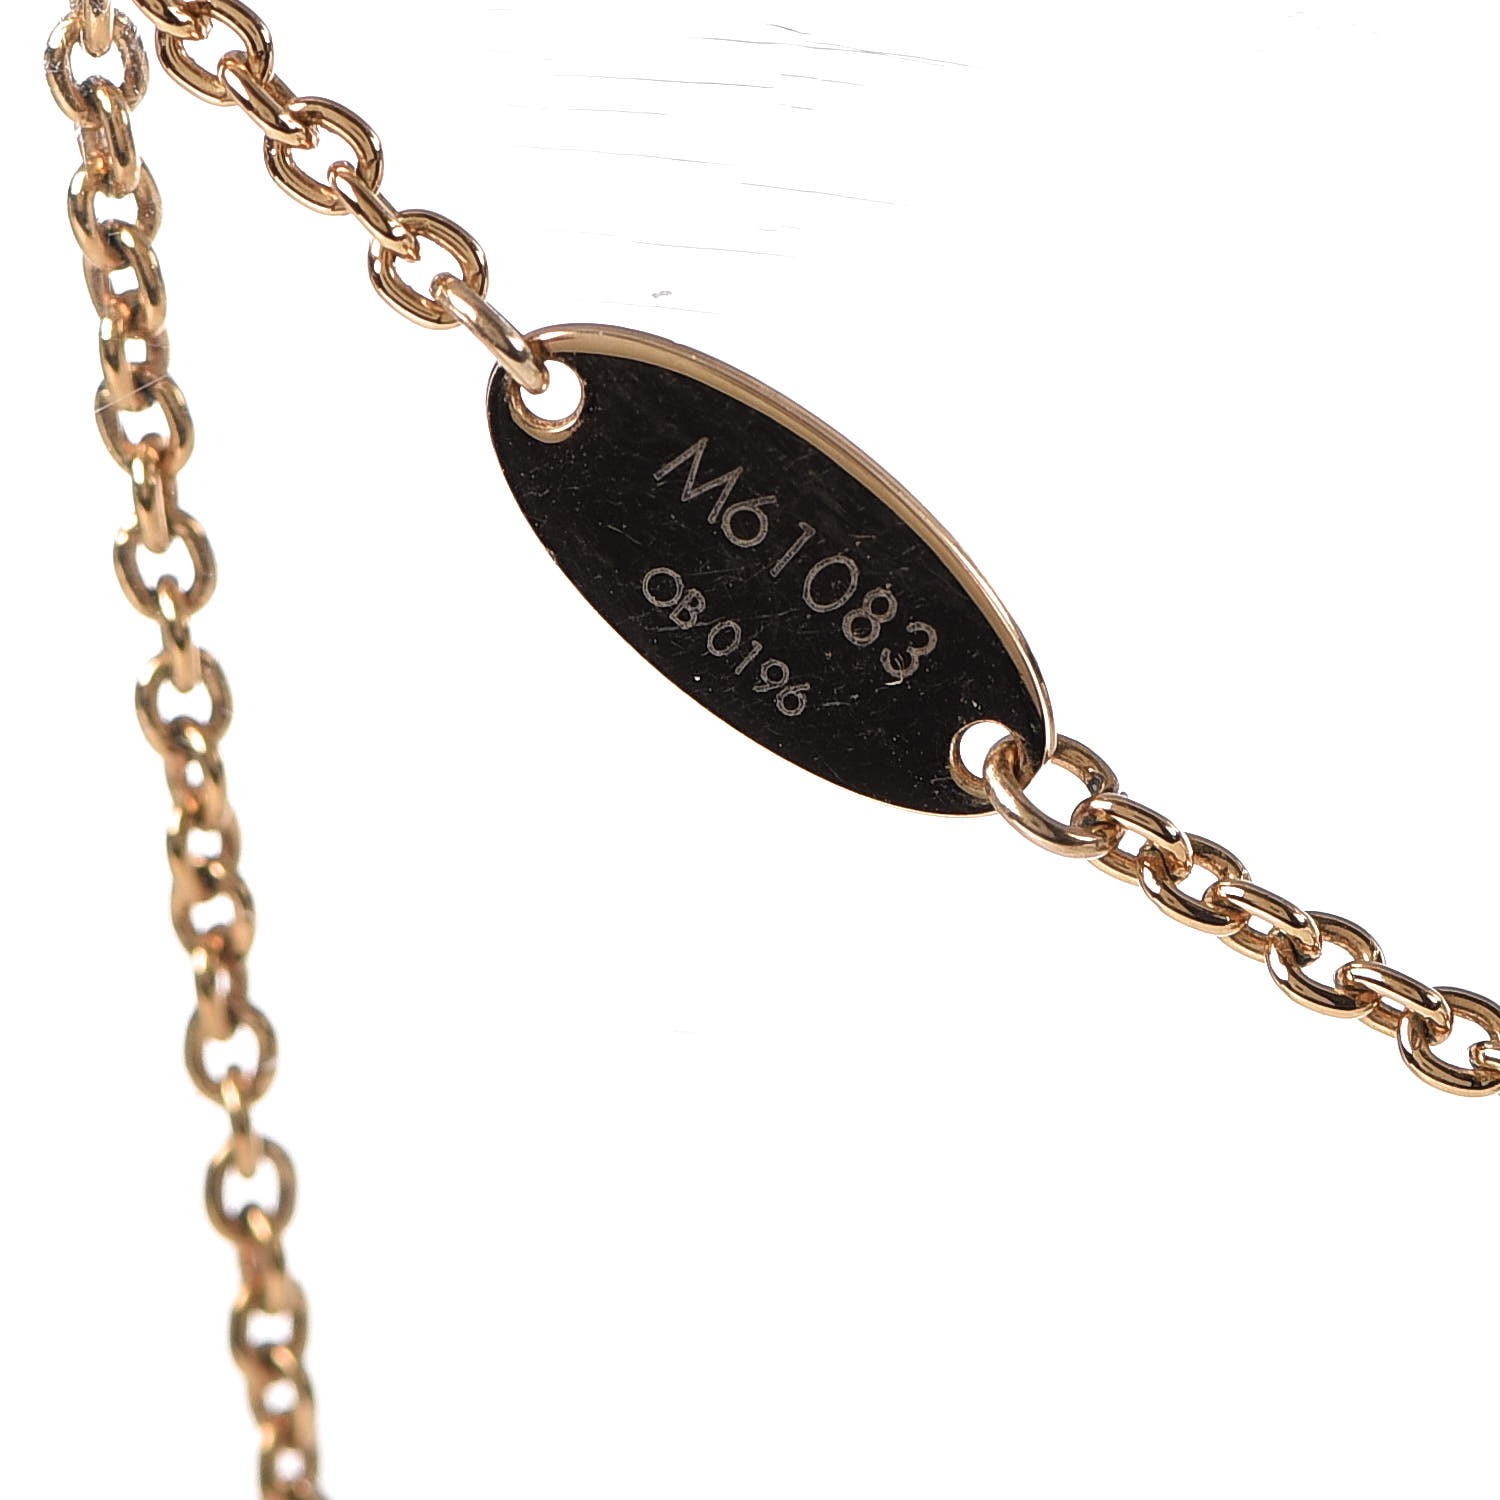 LOUIS VUITTON Necklace M61083 Essential V Gold Plated gold Women Used